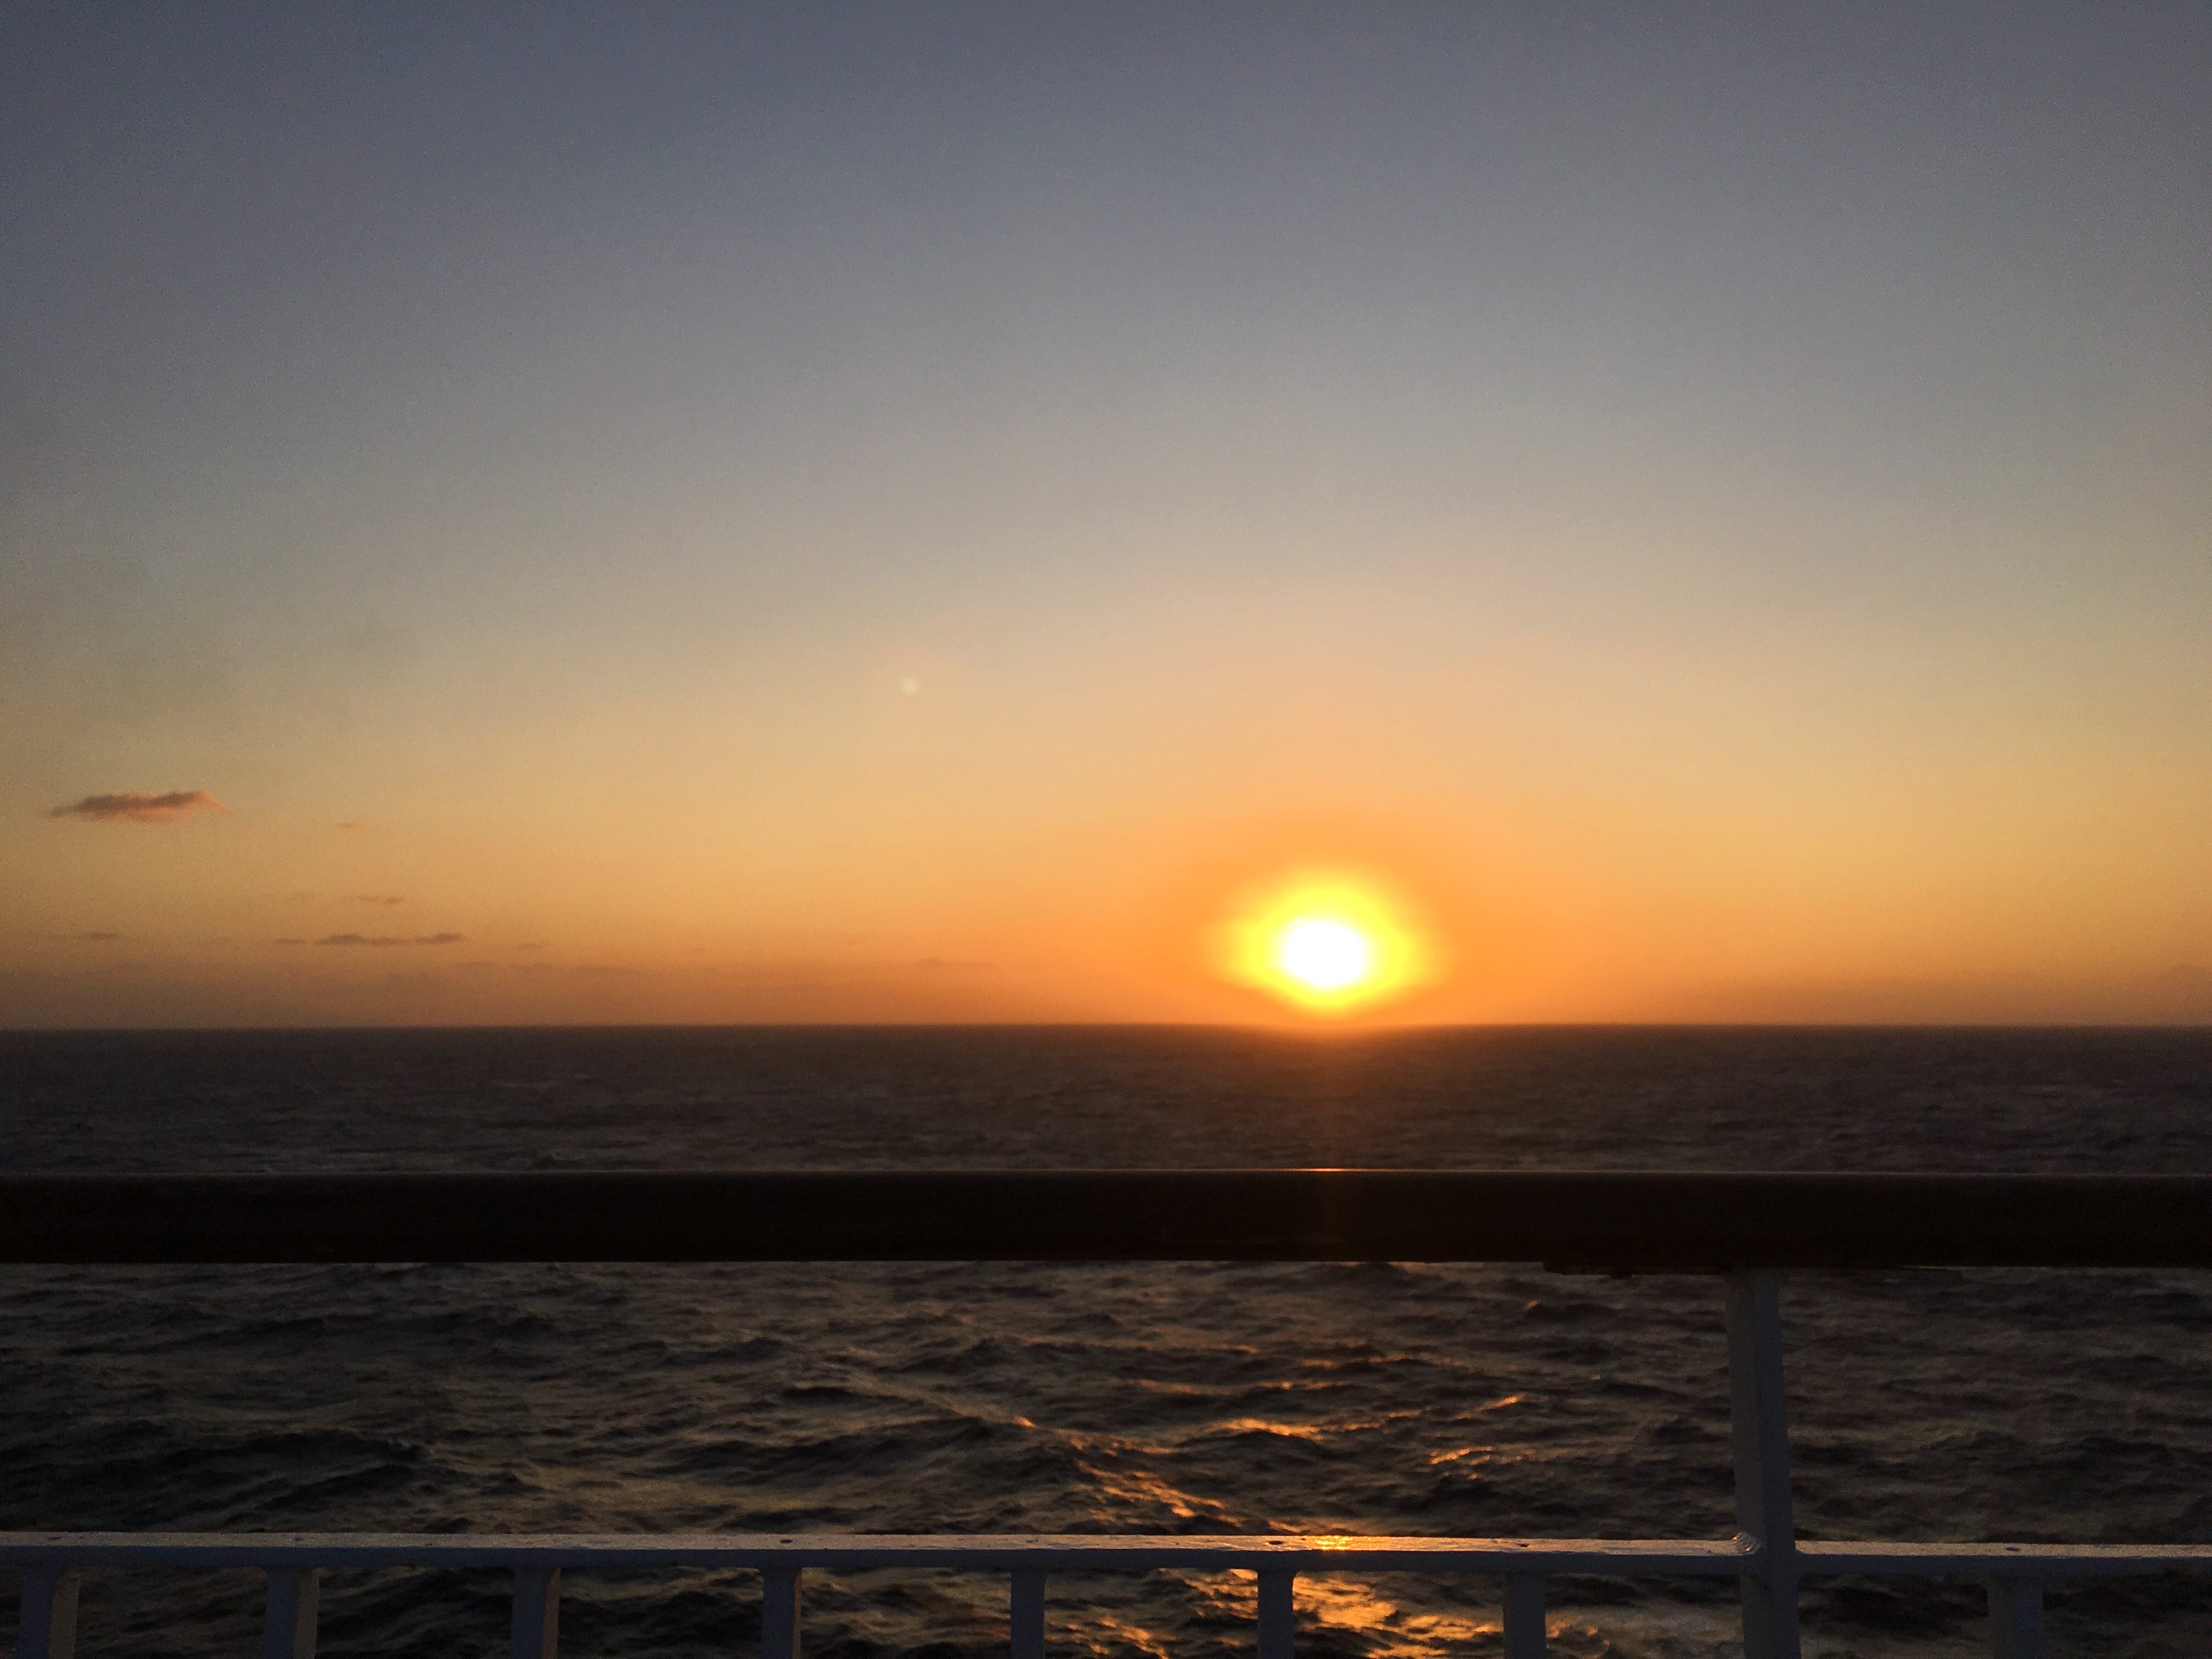 Sleeping on the cabin floor of the GNV Rhapsody, I awake early enough to watch the sunrise. Soon I dock in Porto Torres, then make my way south to Cagliari!